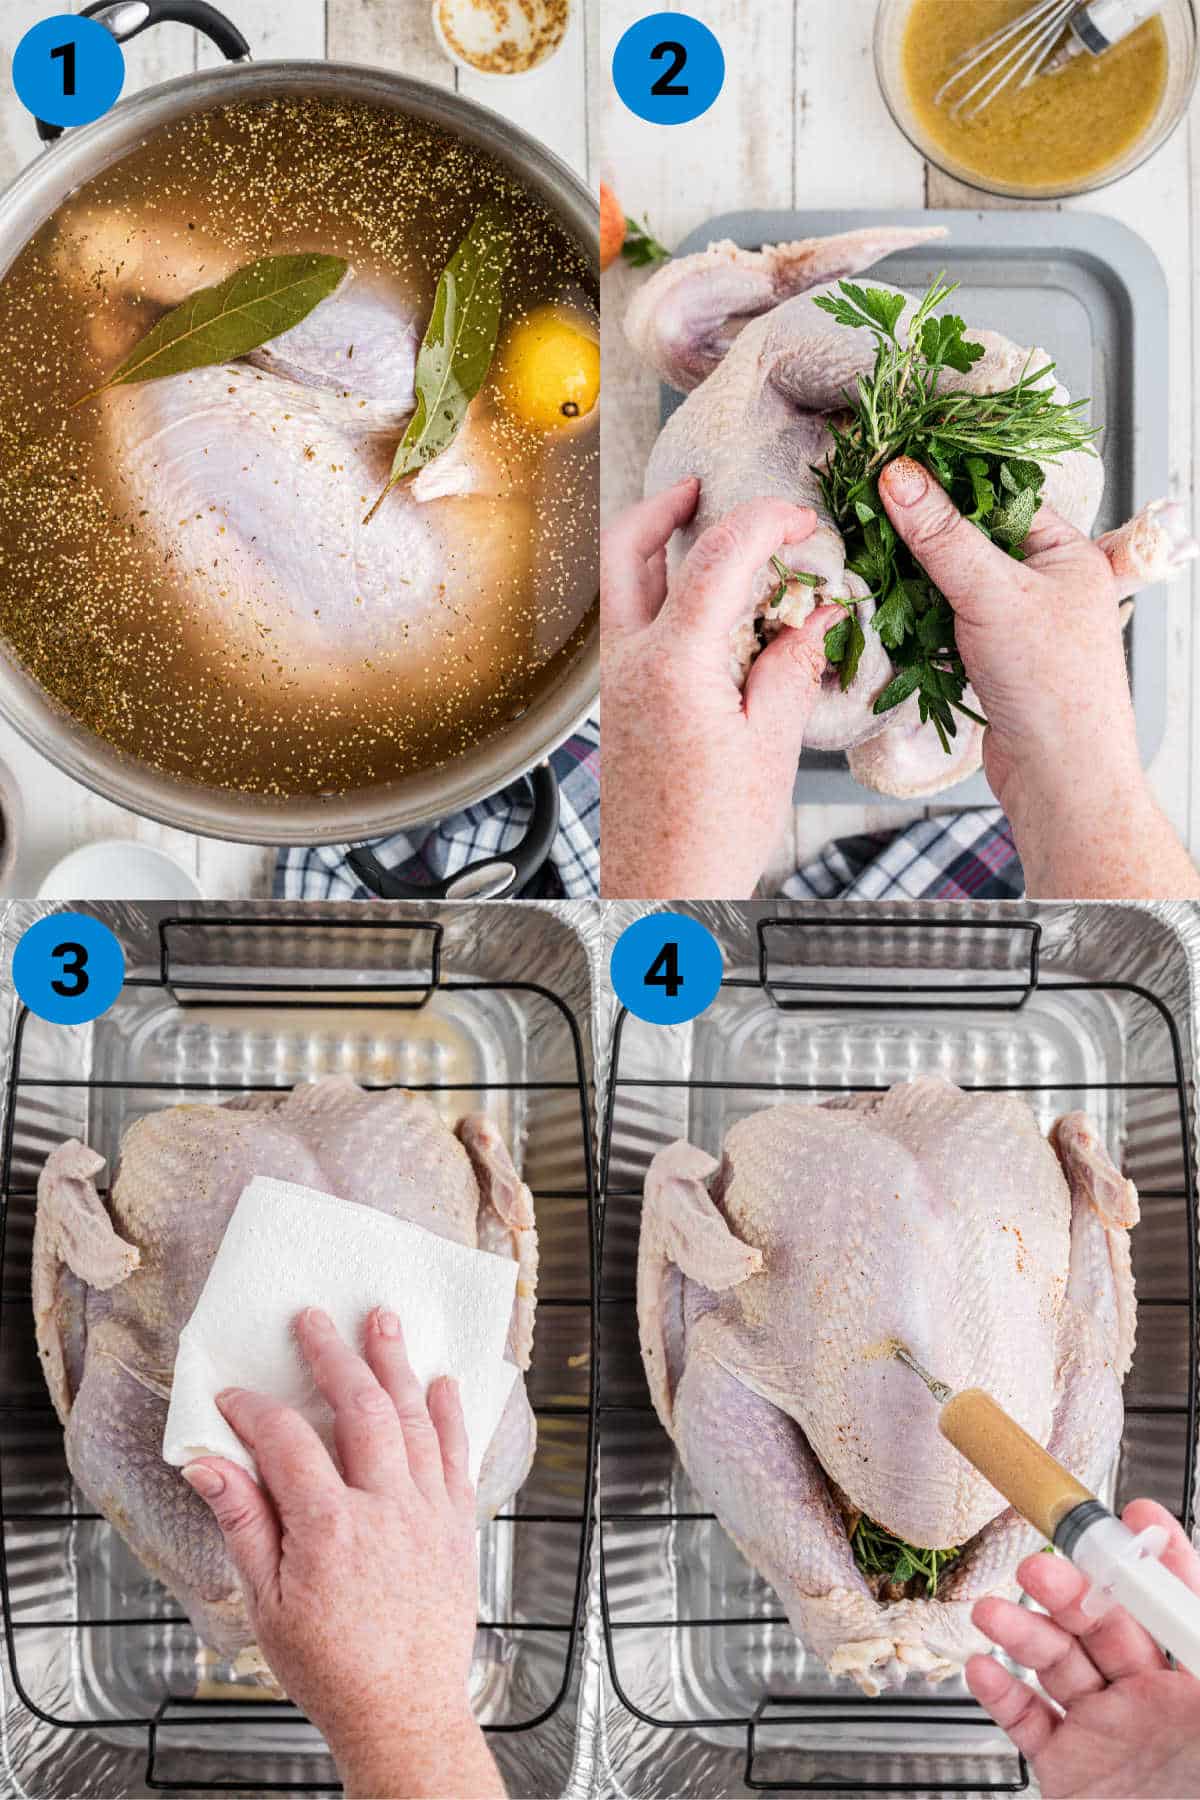 A collage of four images showing how to make a pellet grill smoked turkey, steps 1-4.